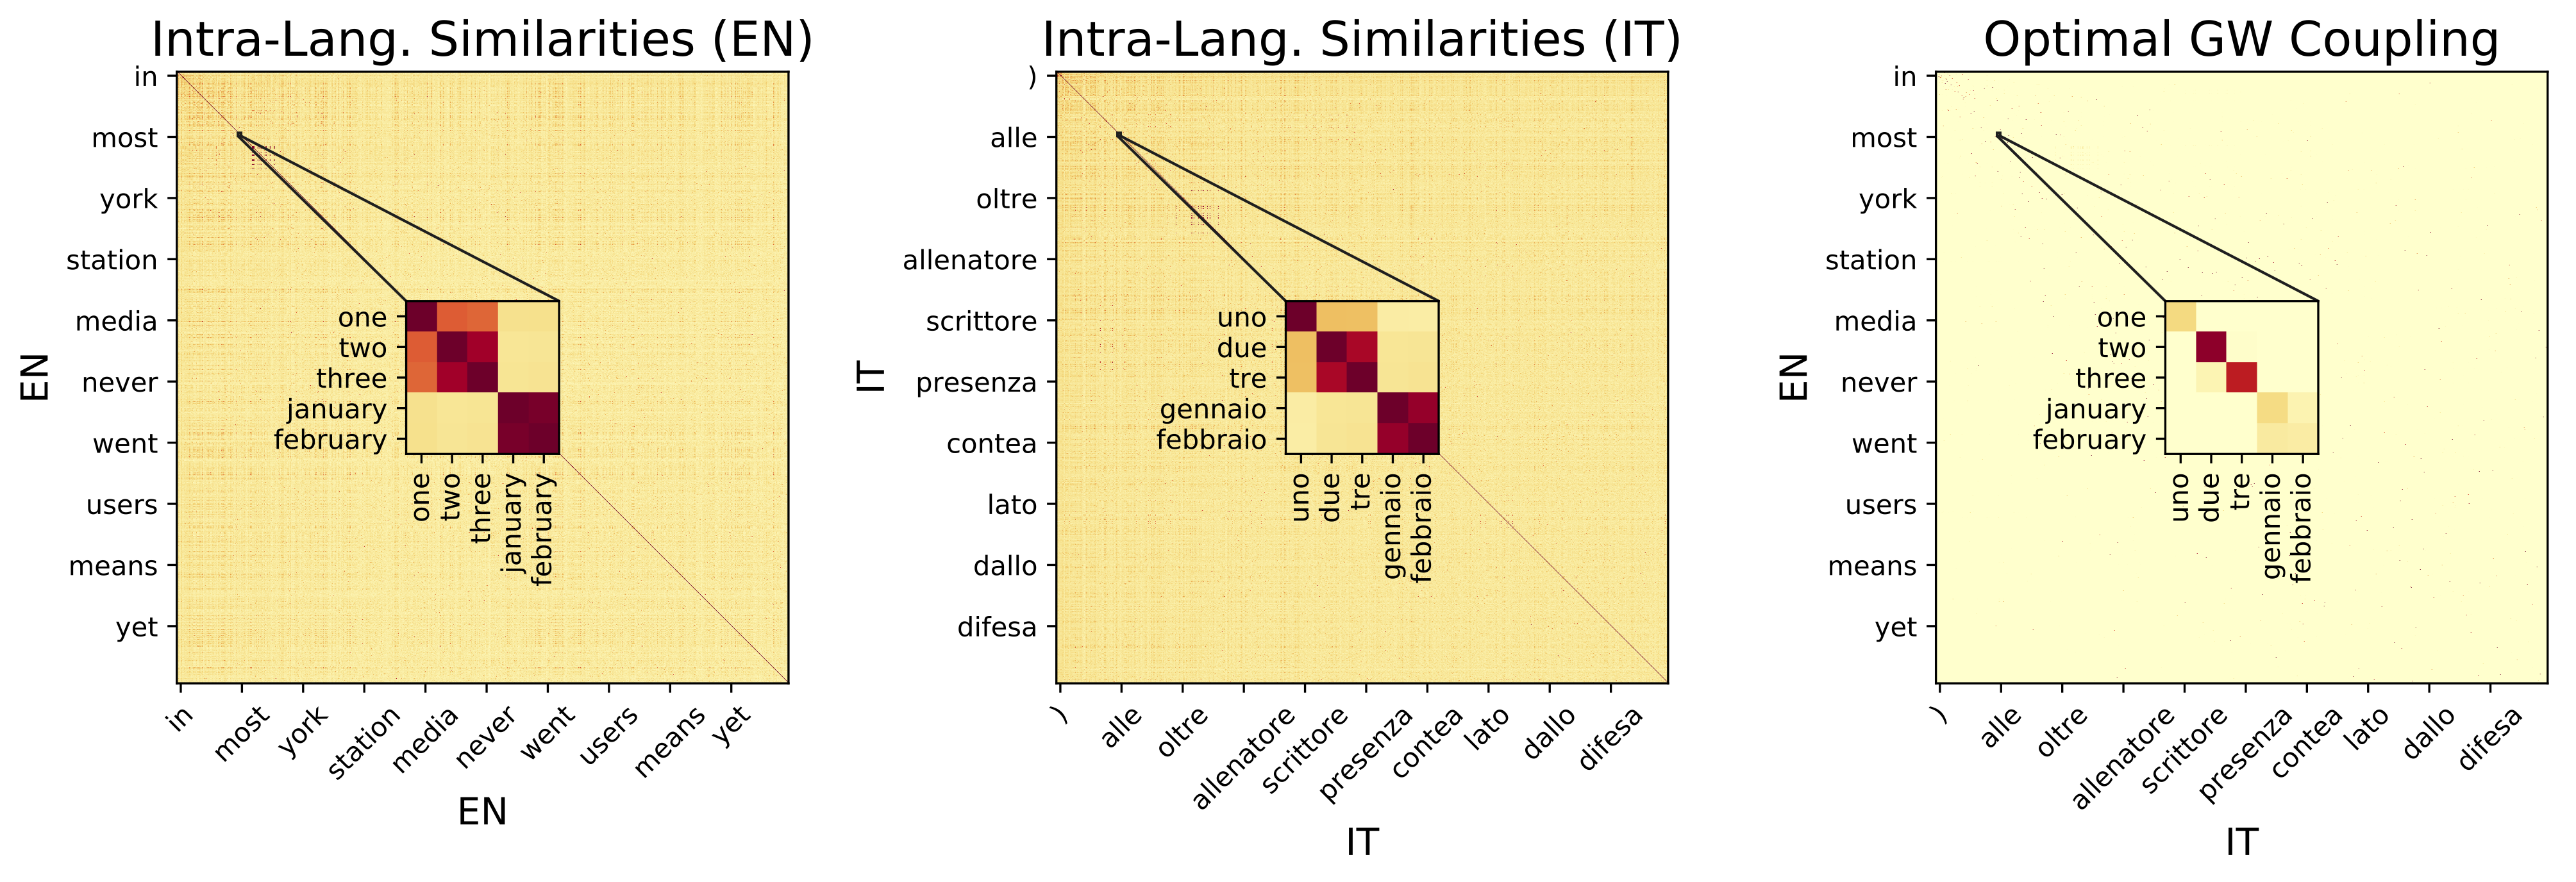 The Gromov-Wasserstein distance is well suited for the task of cross-lingual alignment because it relies on <i>relational</i> rather than <i>positional</i> similarities to infer correspondences across domains. Computing it requires two intra-domain similarity (or cost) matrices (left & center), and it produces an optimal coupling of source and target points with minimal discrepancy cost (right).